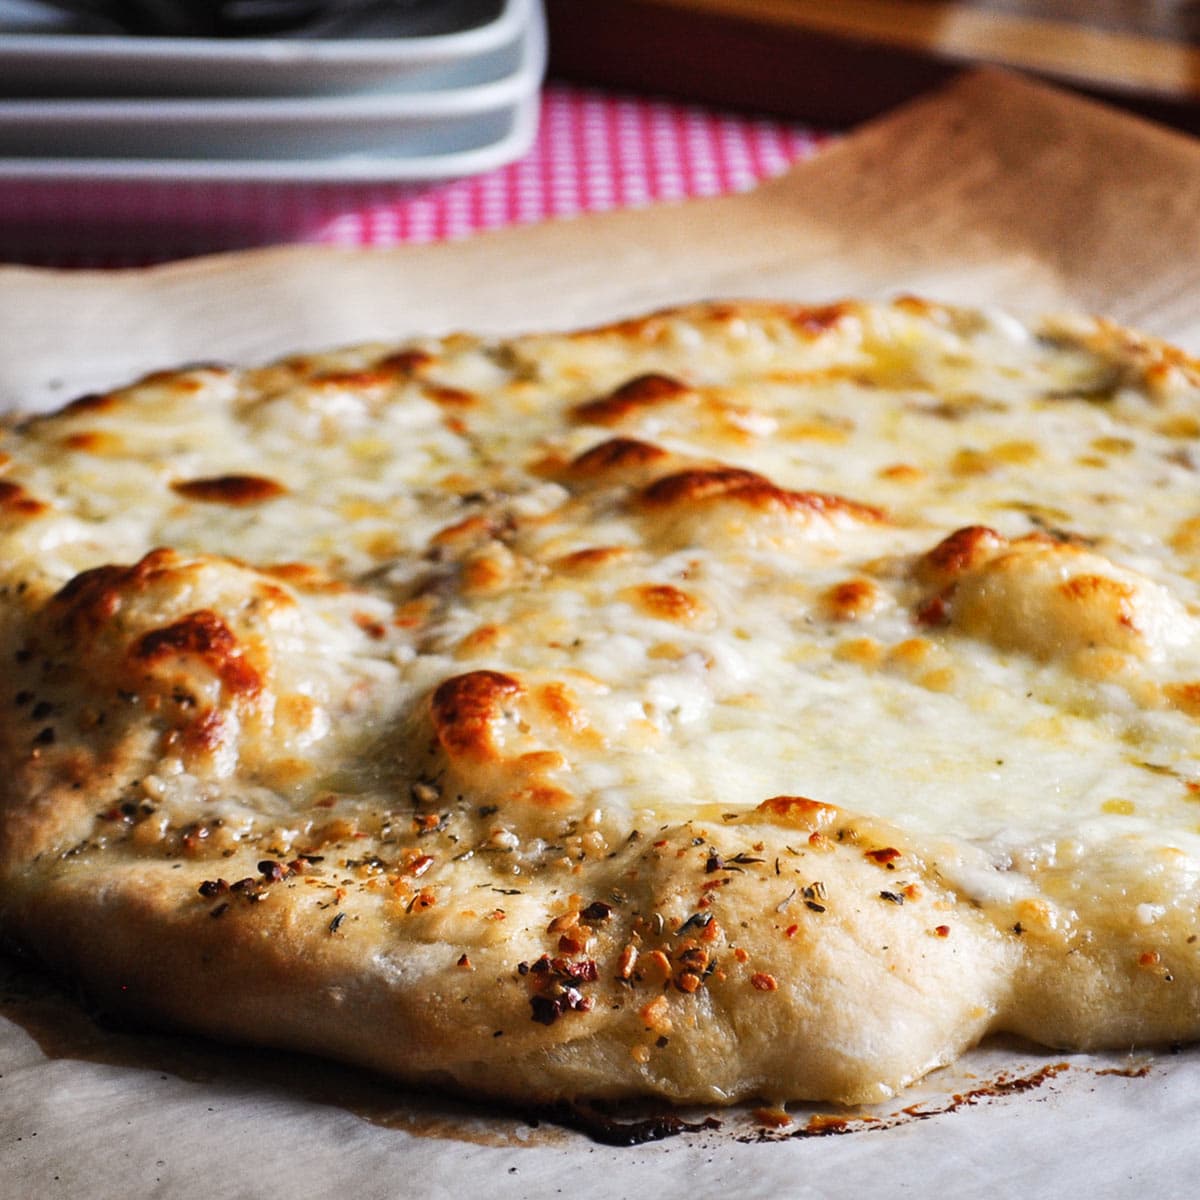 A just baked homemade cheese pizza.